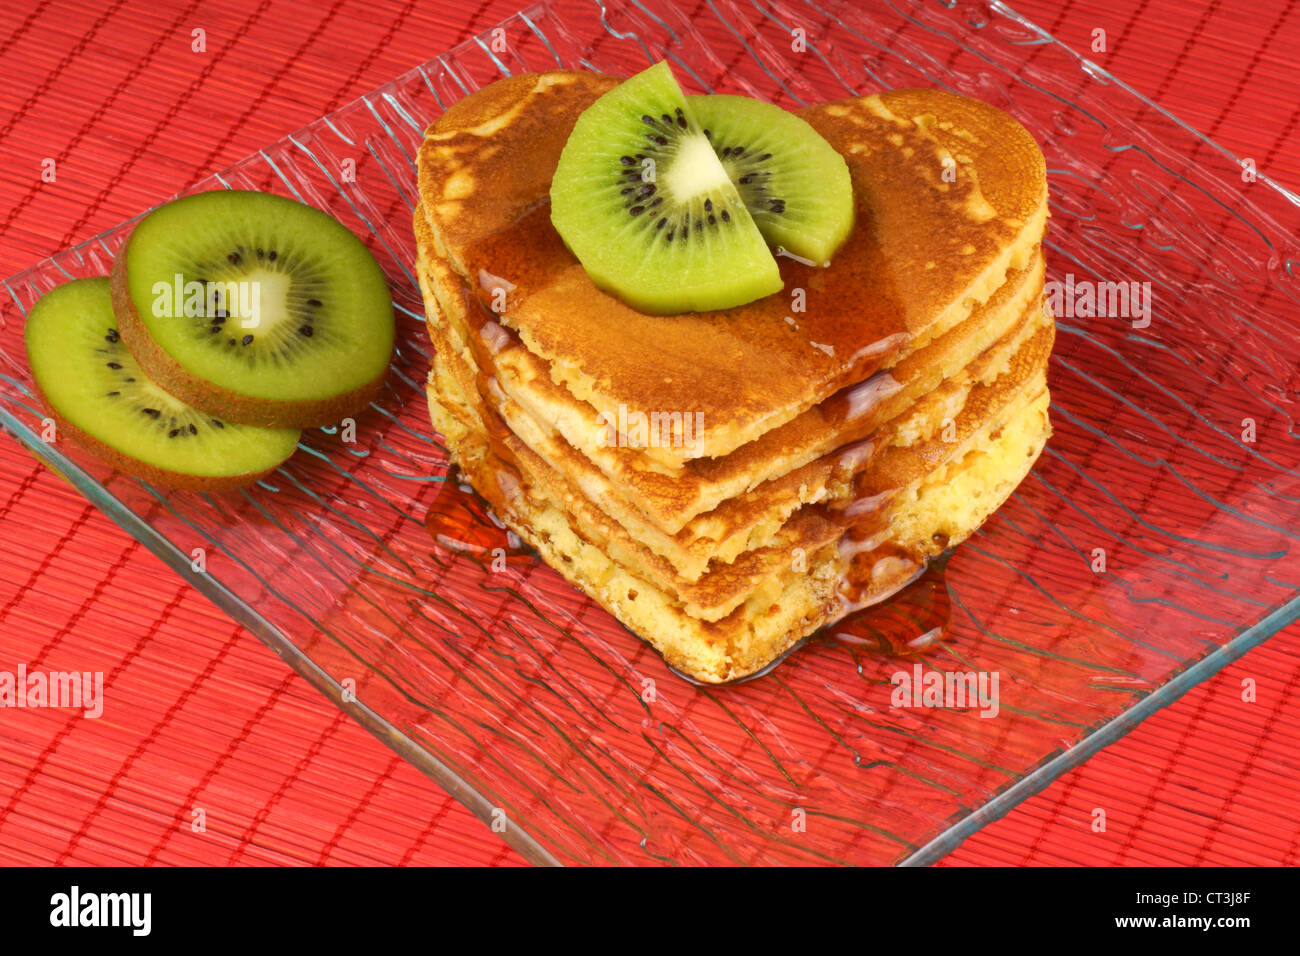 Heart-shaped pancakes with syrup and kiwi fruit on a transparent glass dish for Valentine's Day breakfast. Stock Photo